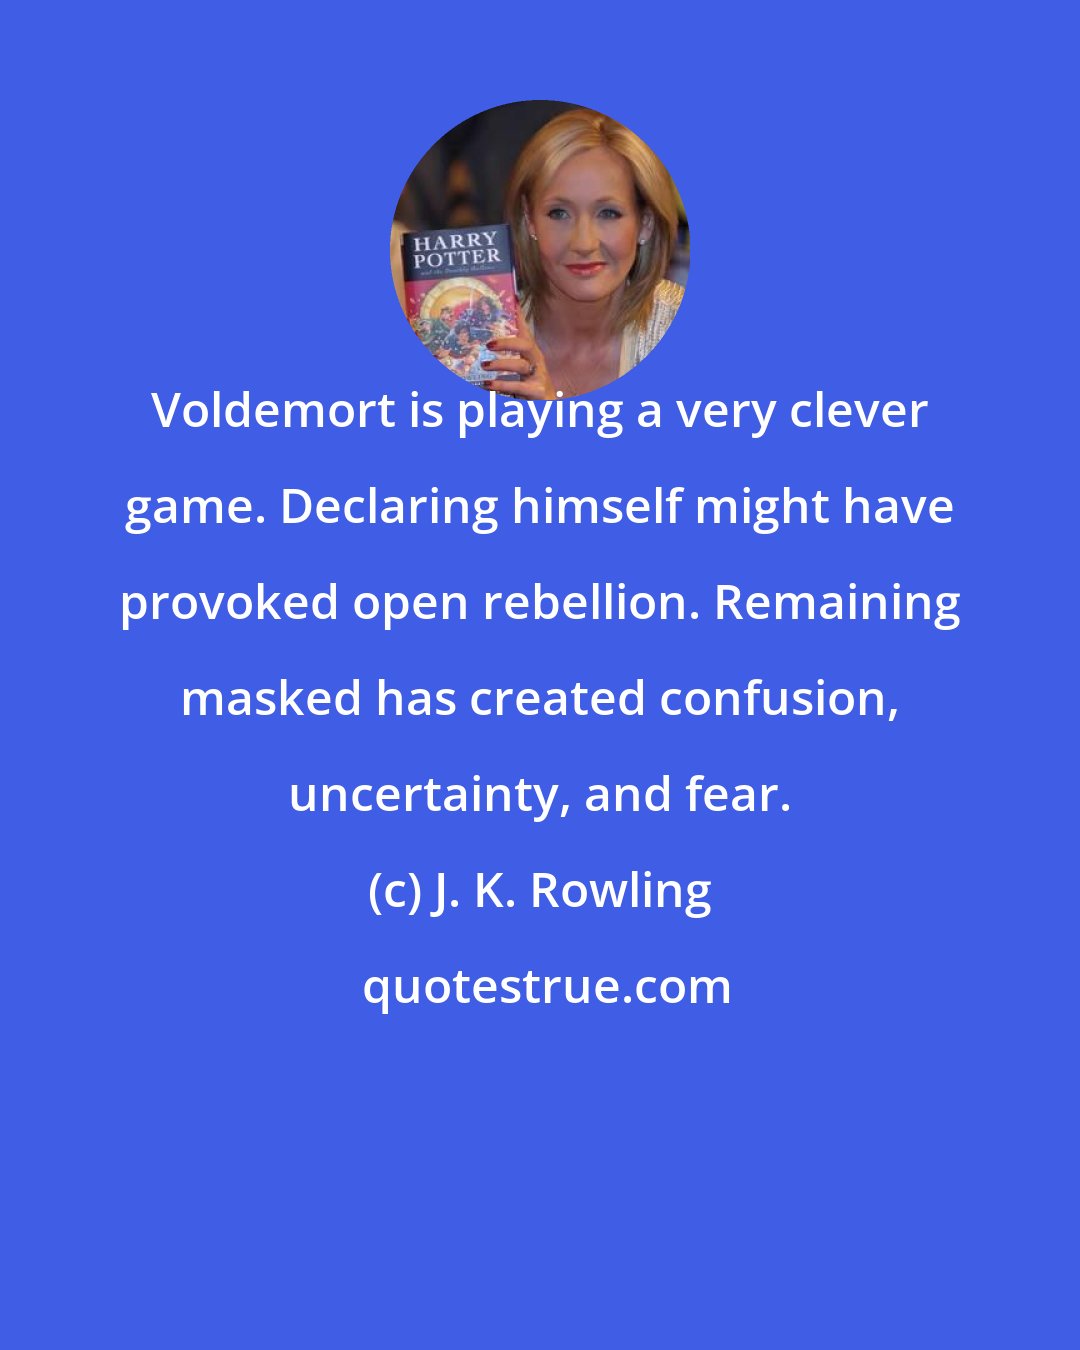 J. K. Rowling: Voldemort is playing a very clever game. Declaring himself might have provoked open rebellion. Remaining masked has created confusion, uncertainty, and fear.